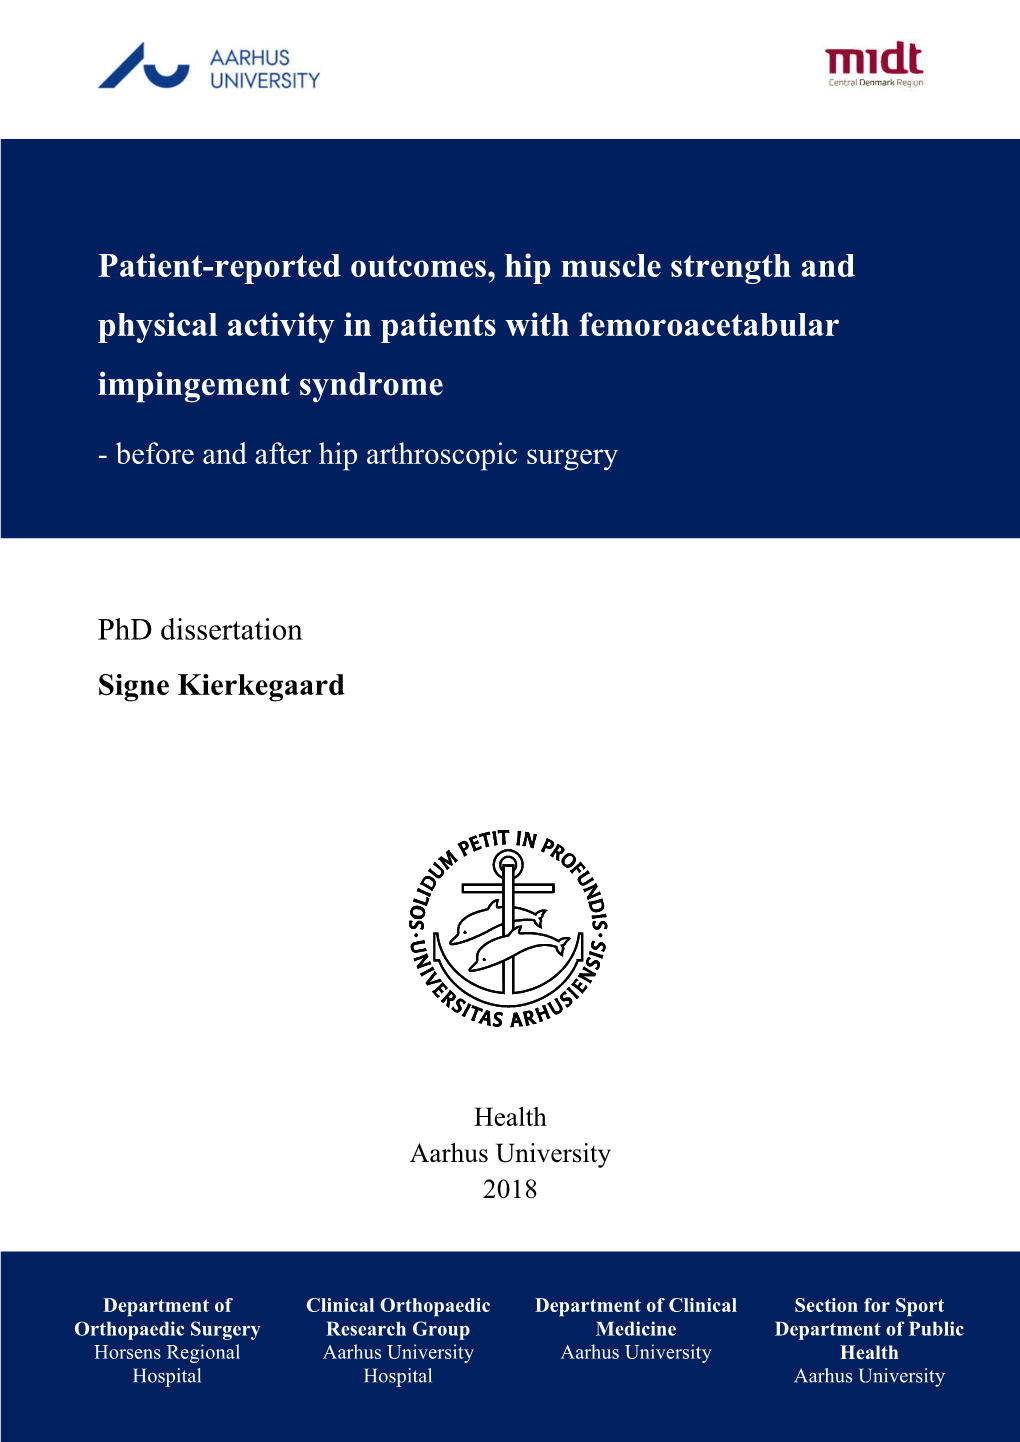 Patient-Reported Outcomes, Hip Muscle Strength and Physical Activity in Patients with Femoroacetabular Impingement Syndrome